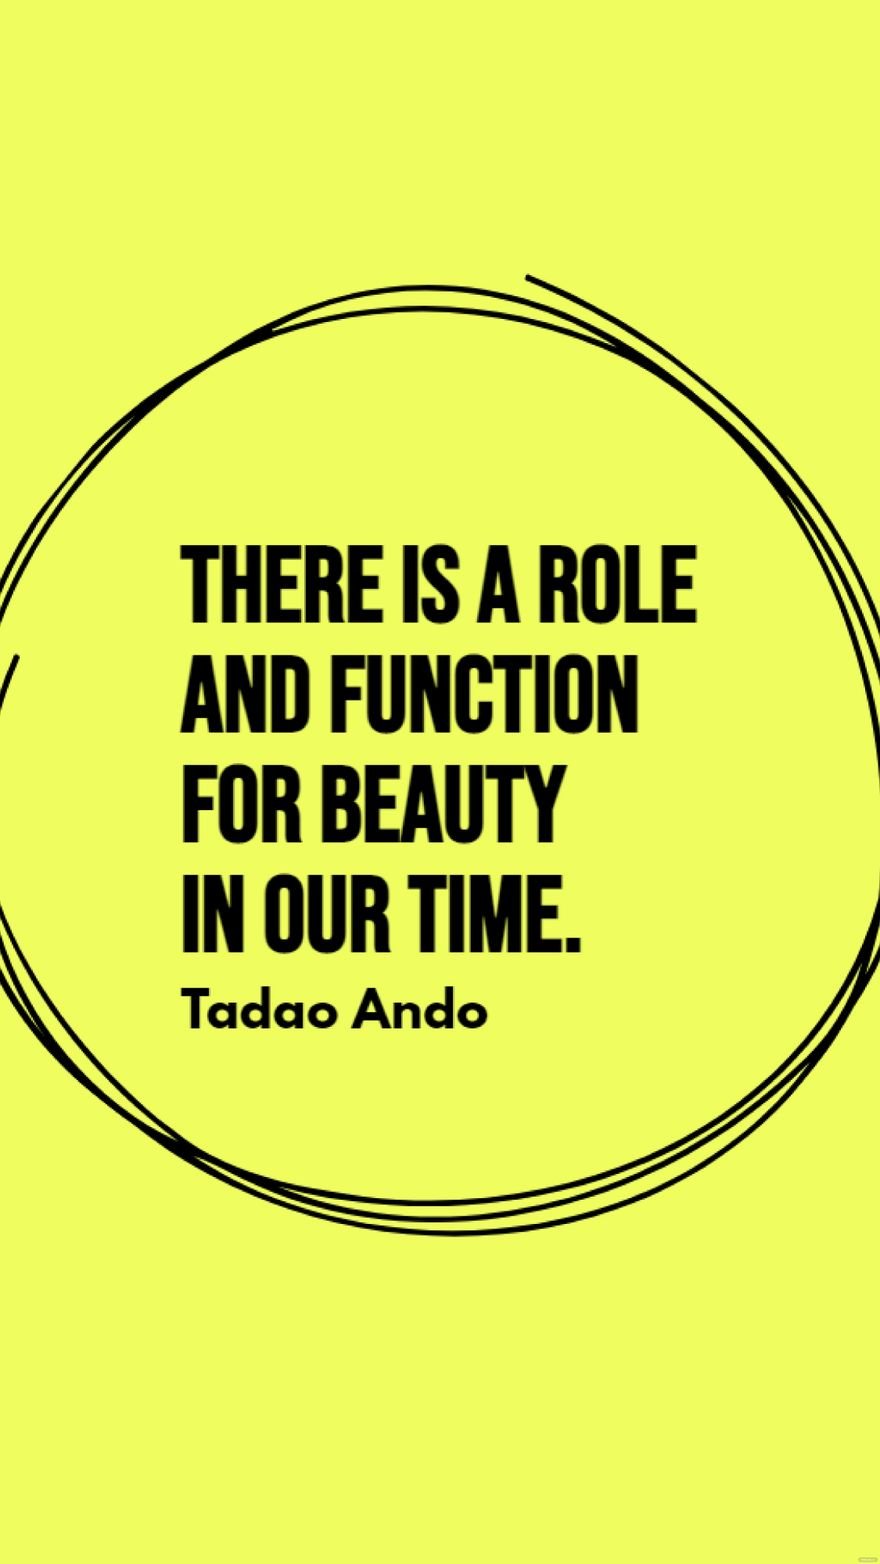 Free Tadao Ando - There is a role and function for beauty in our time. in JPG